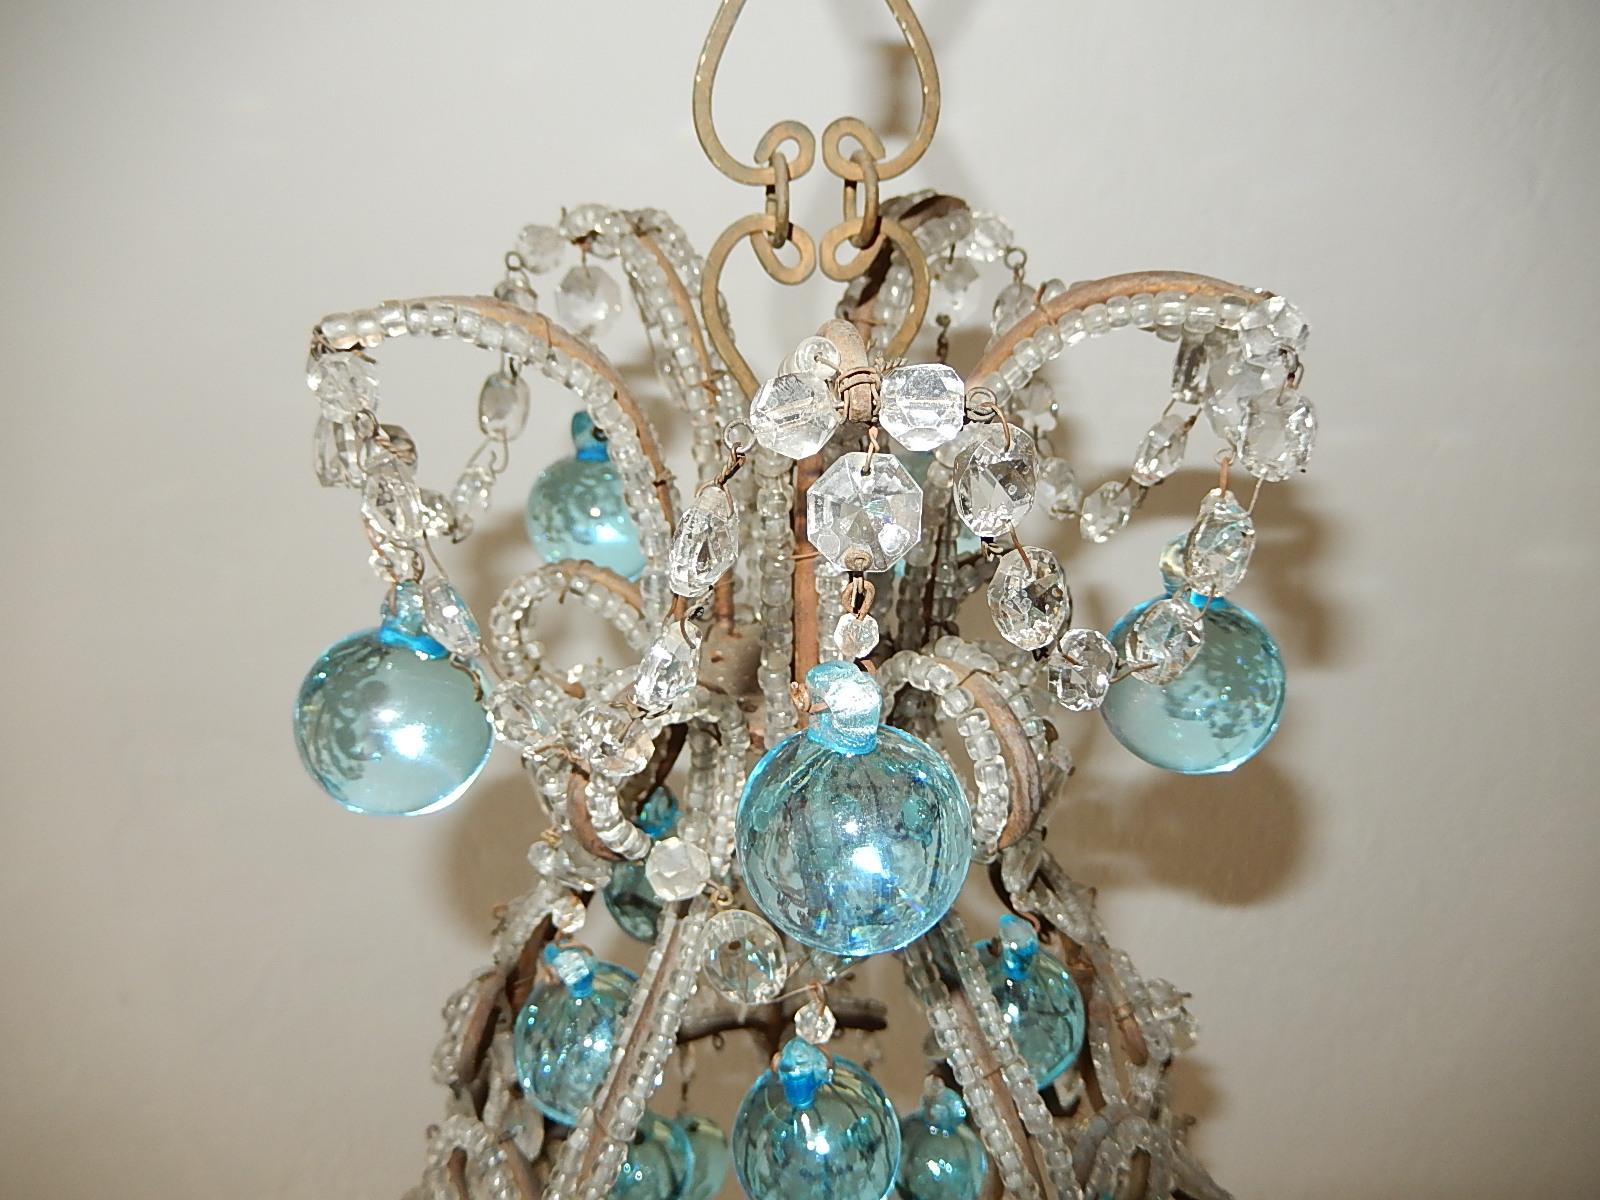 French Aqua Blue Murano Balls Beaded Swags Chandelier, circa 1900 For Sale 2